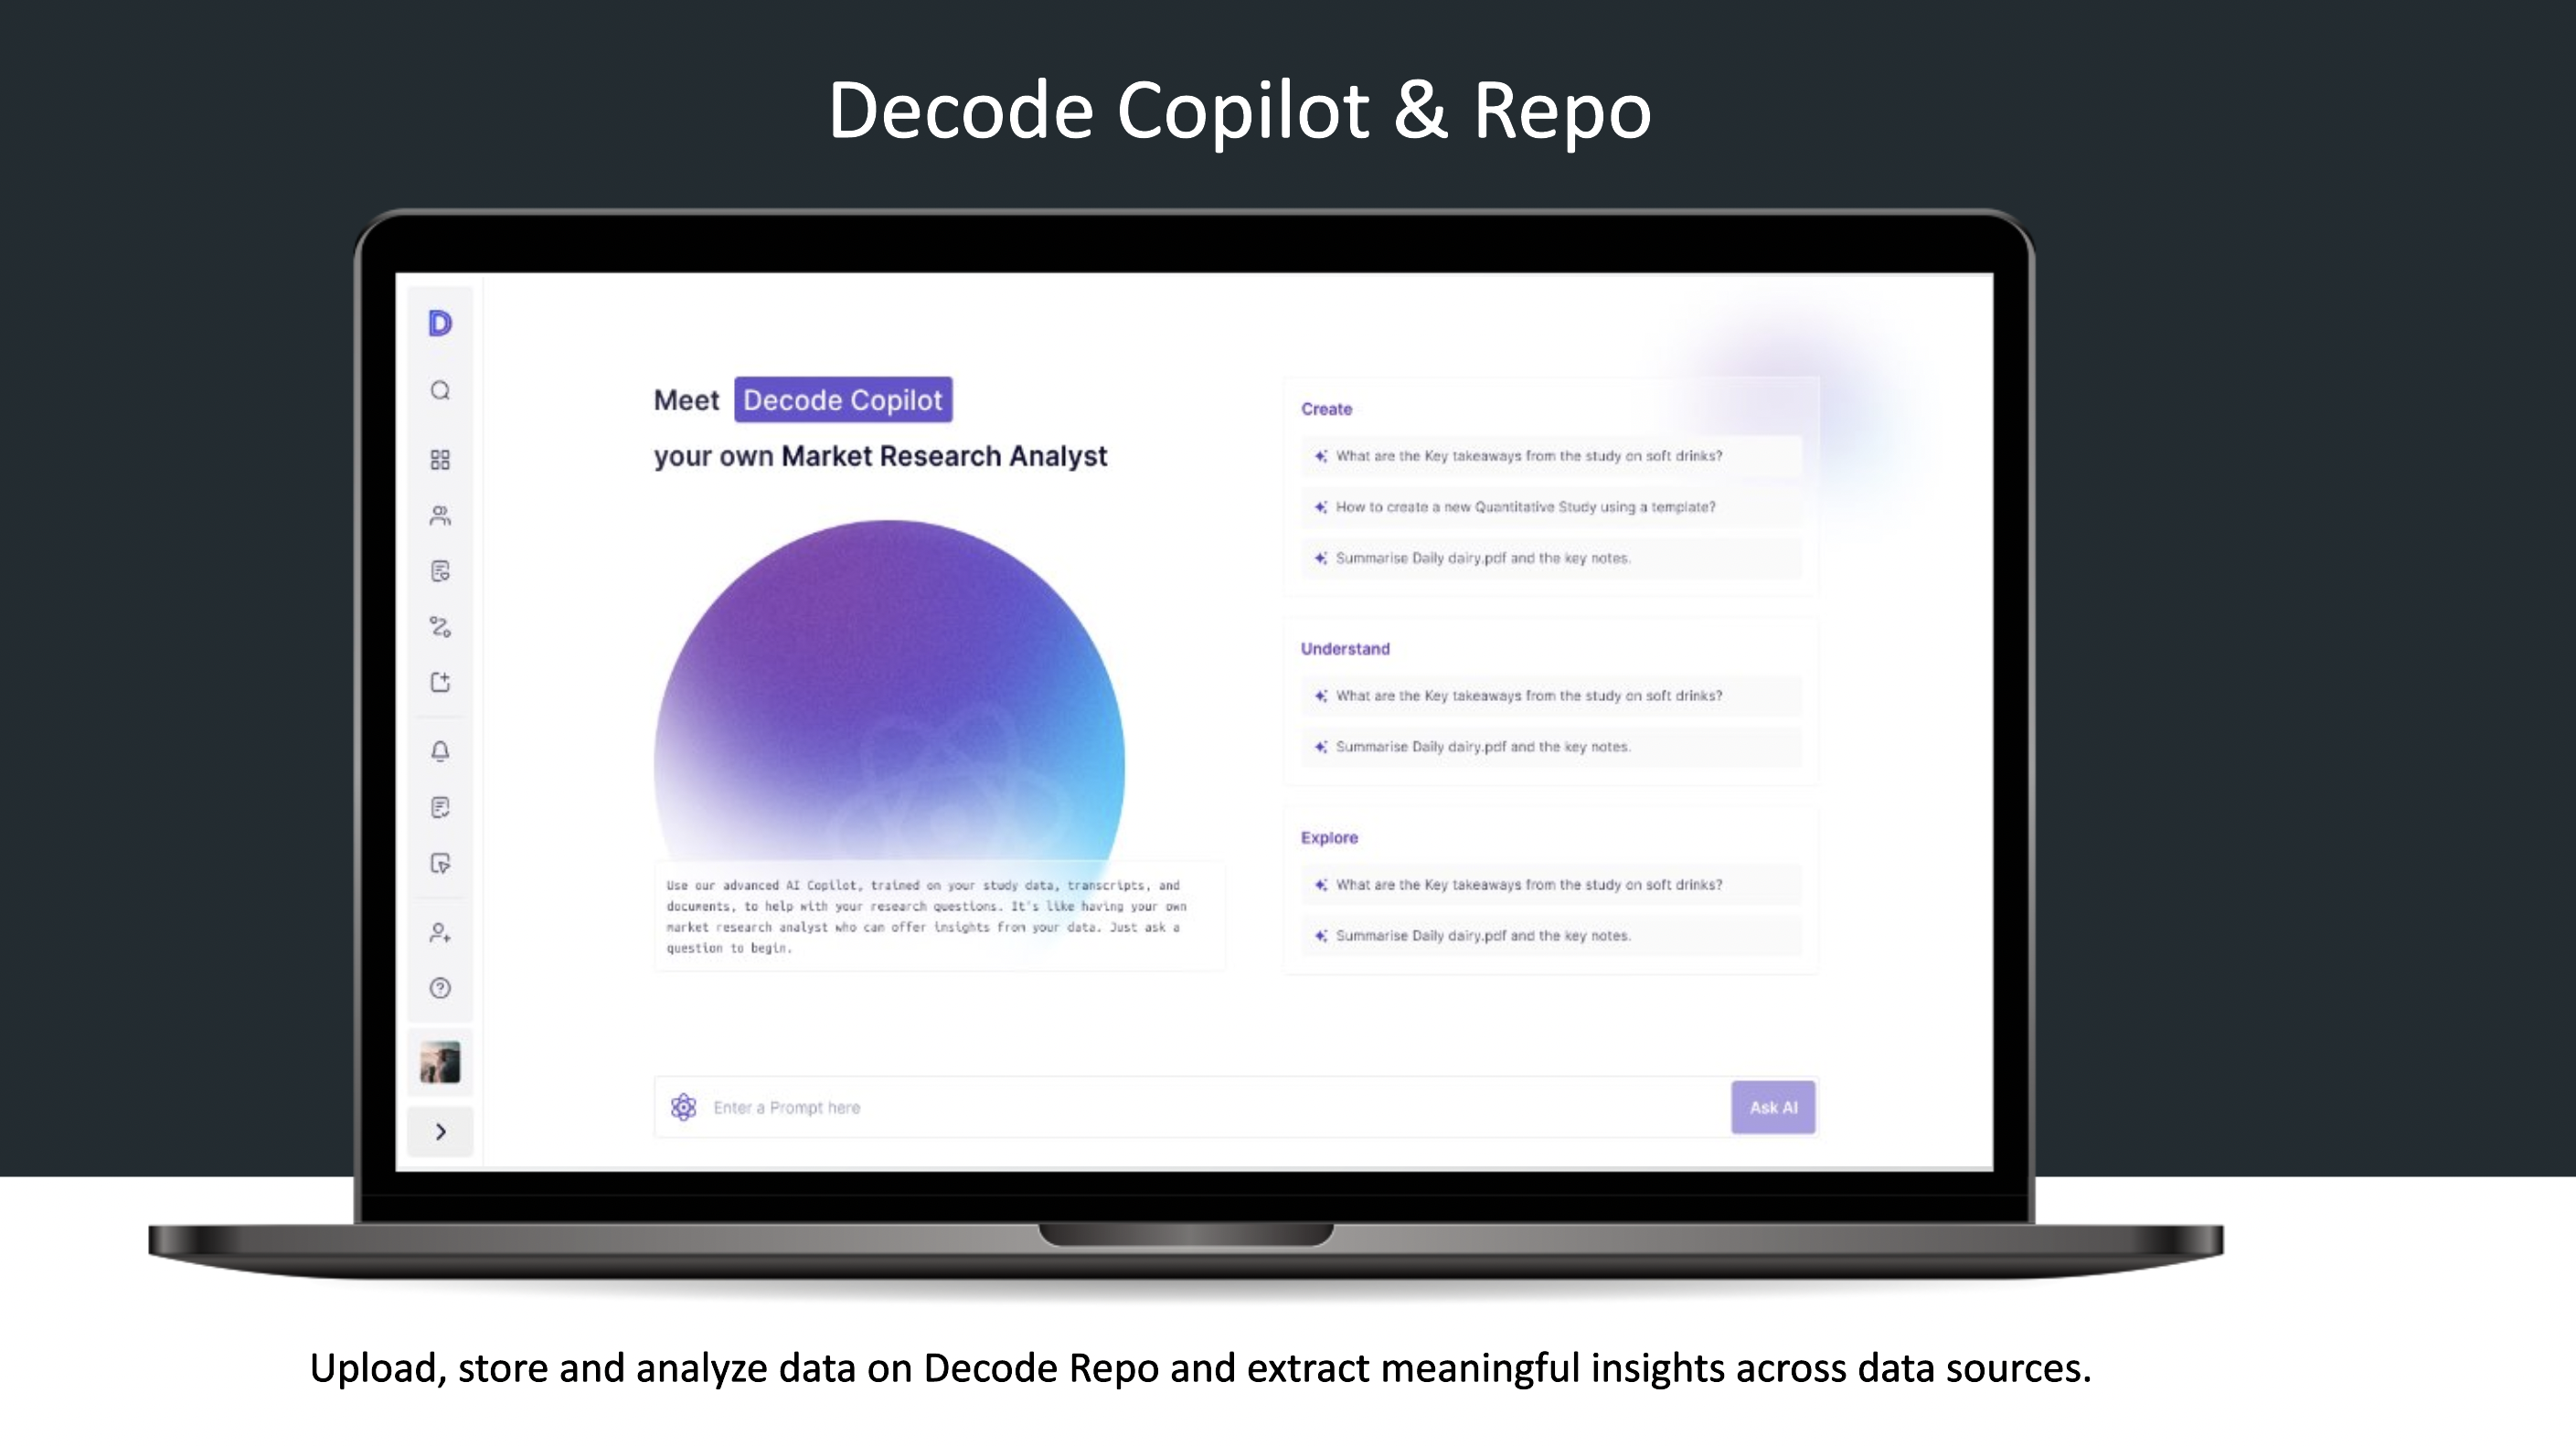 Upload, store and analyze data on Decode Repo and extract meaningful insights across data sources.​